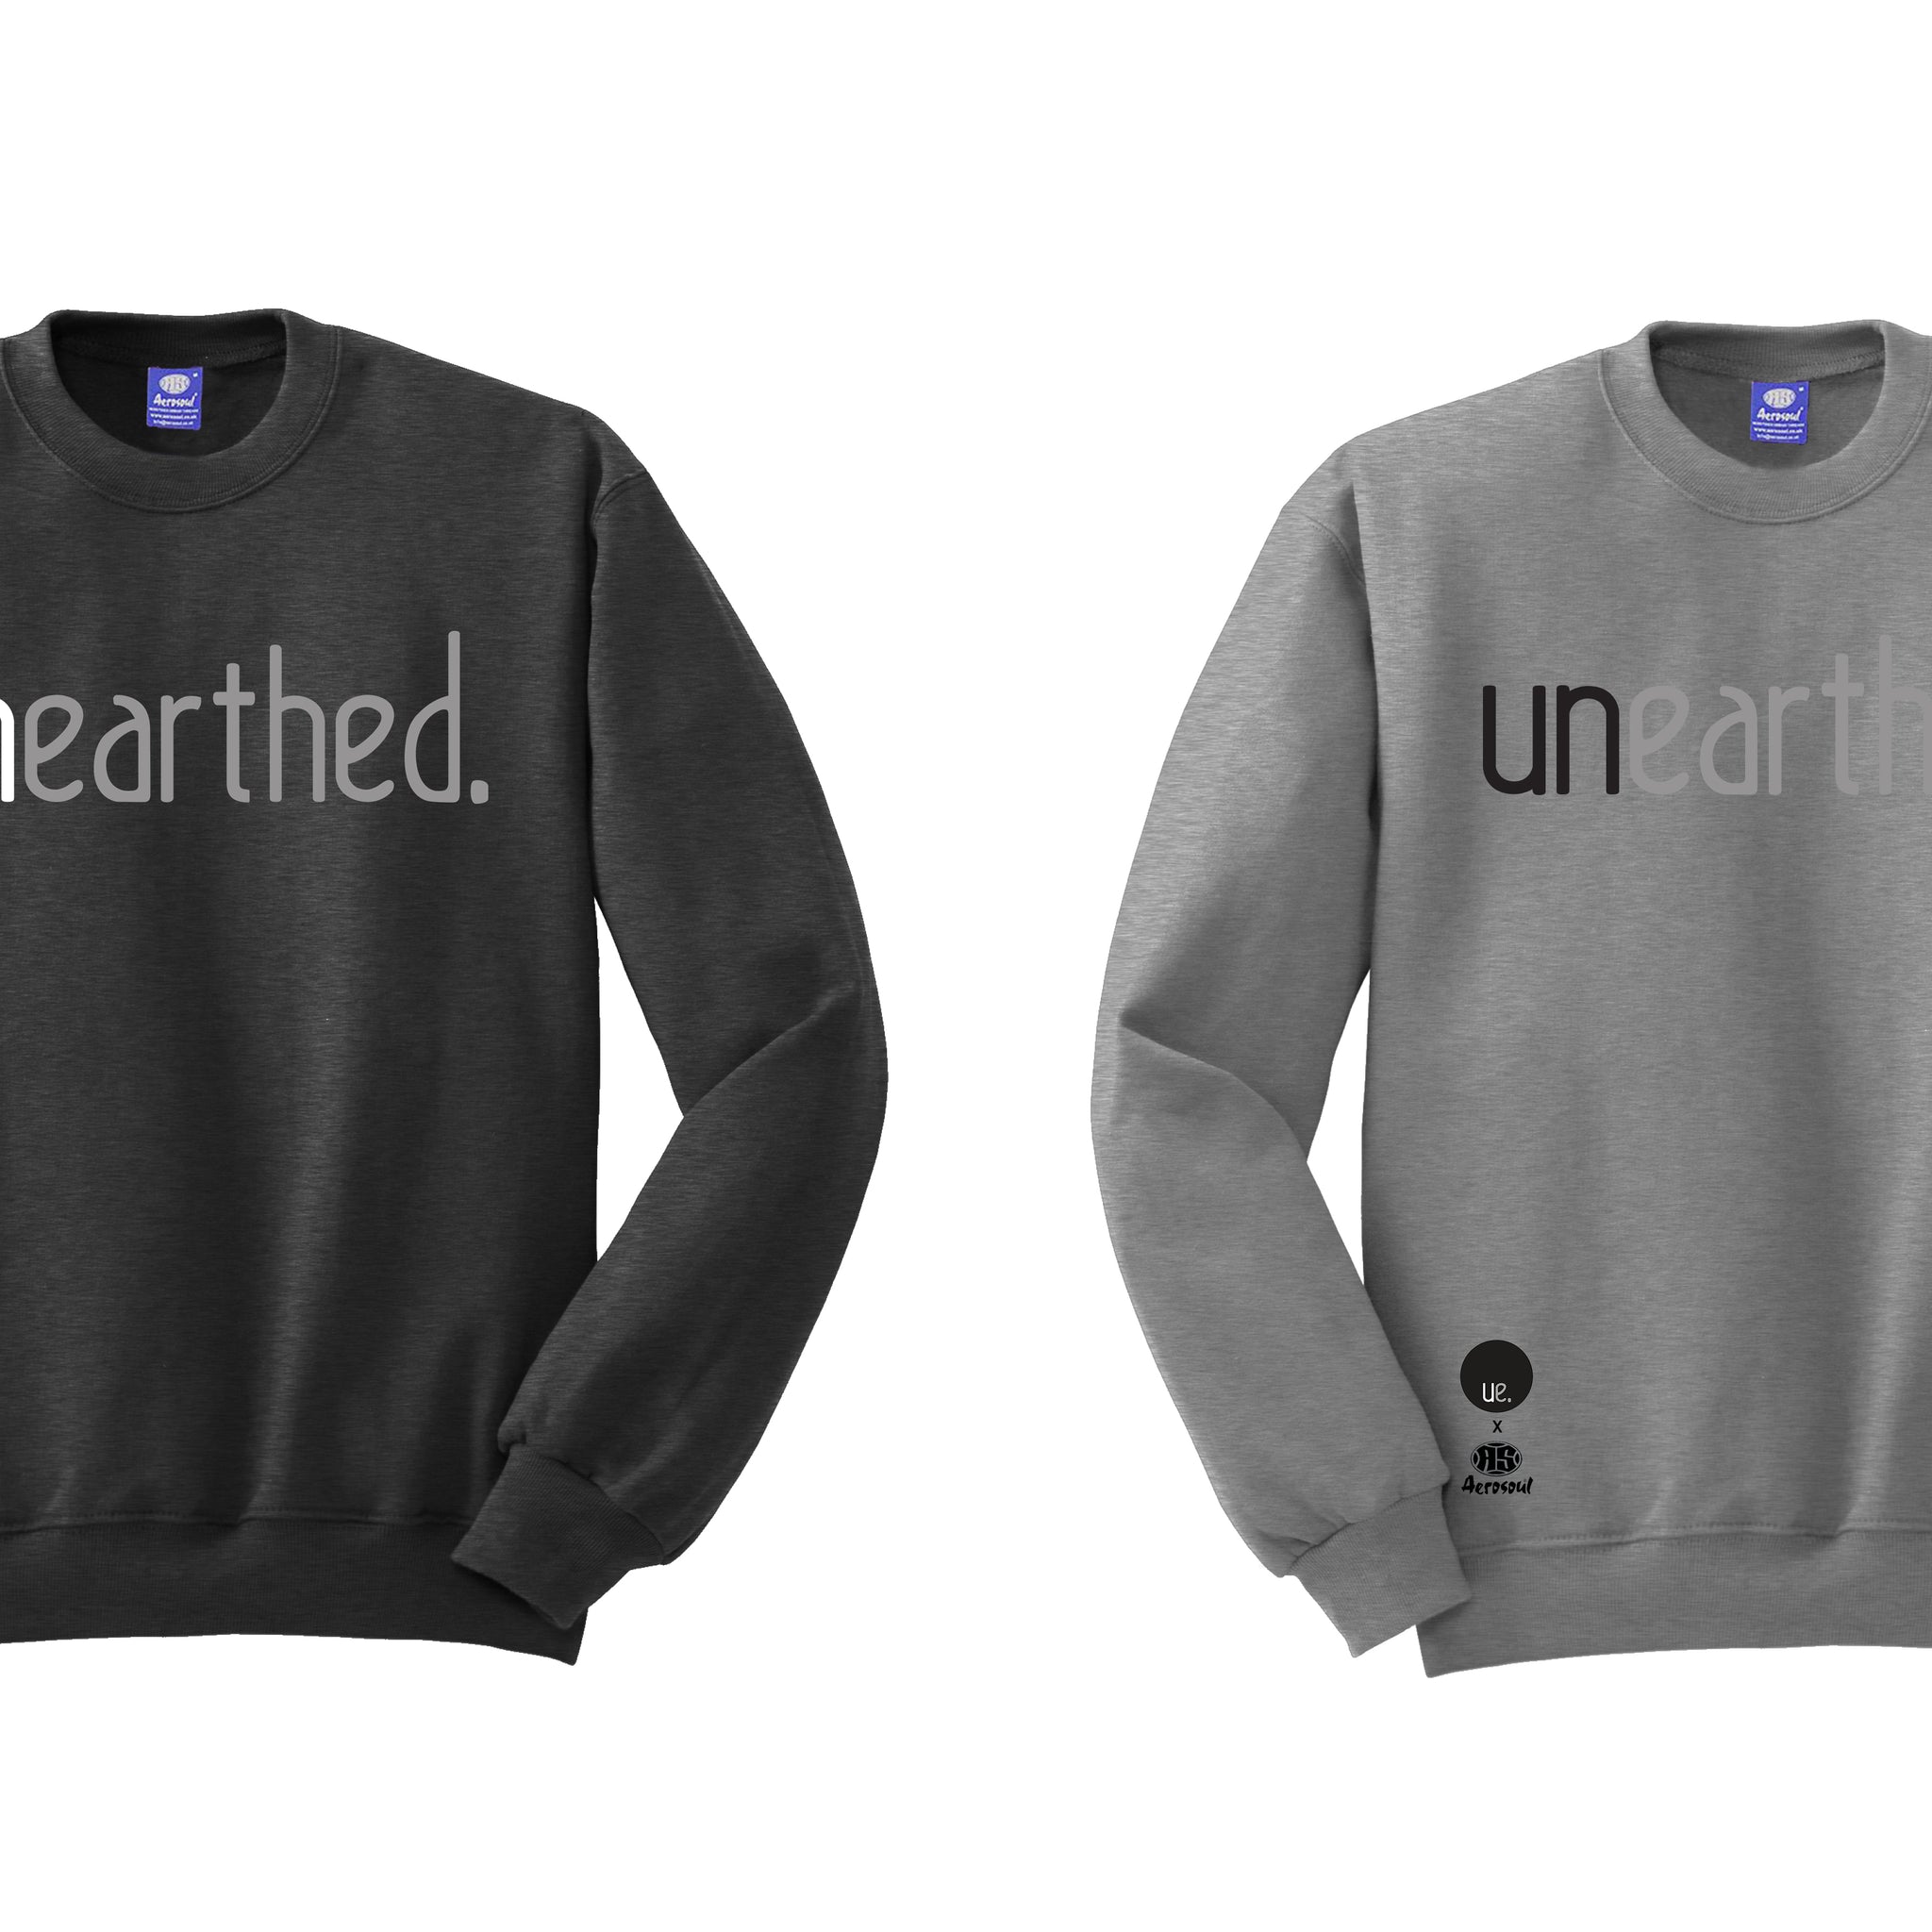 Unearthed Sounds X Aerosoul Collab Sweatshirts